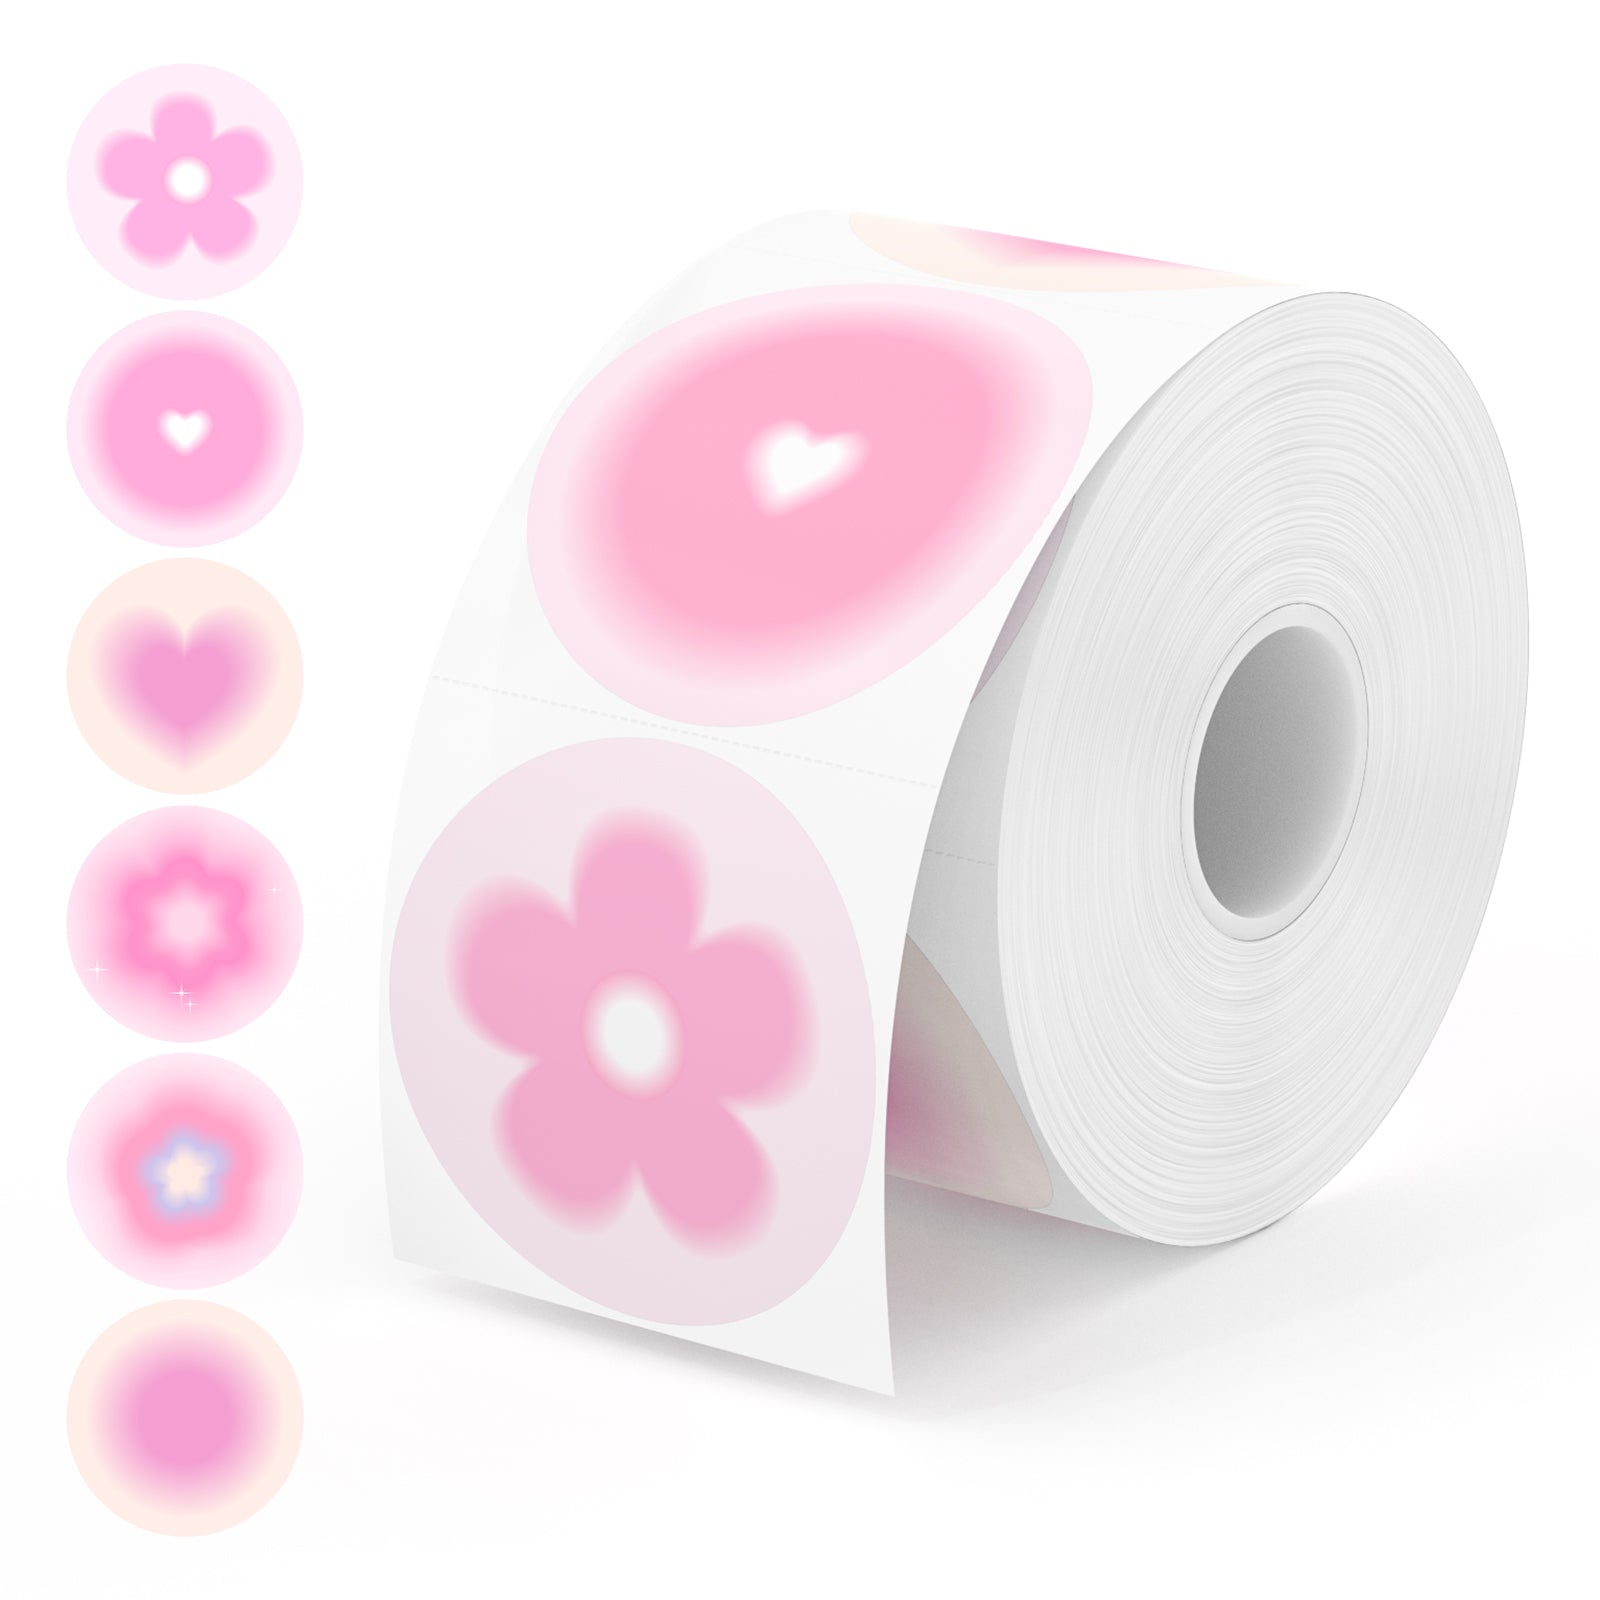 Each roll features six charming pink patterns, giving you a variety of options to elevate your labeling game.